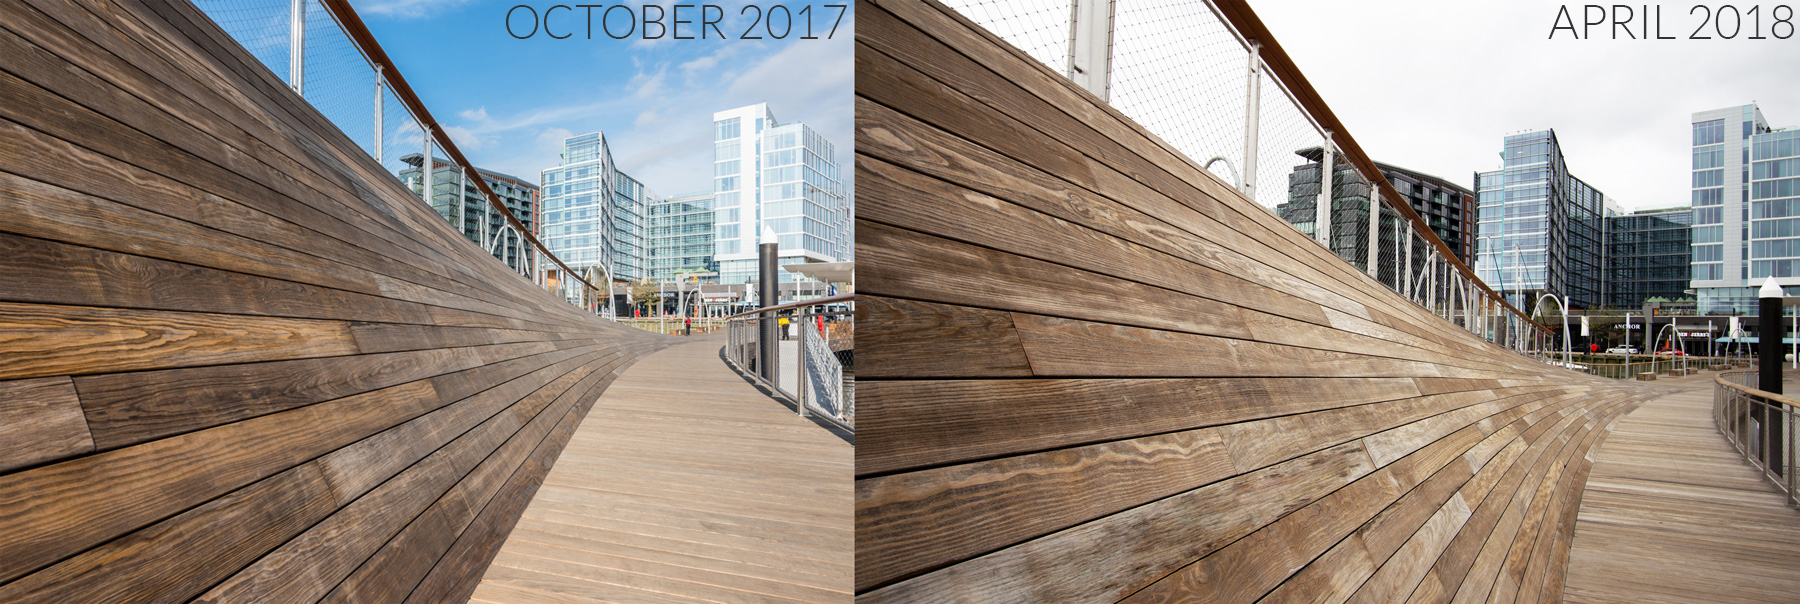 weathered Kebony decking before and after